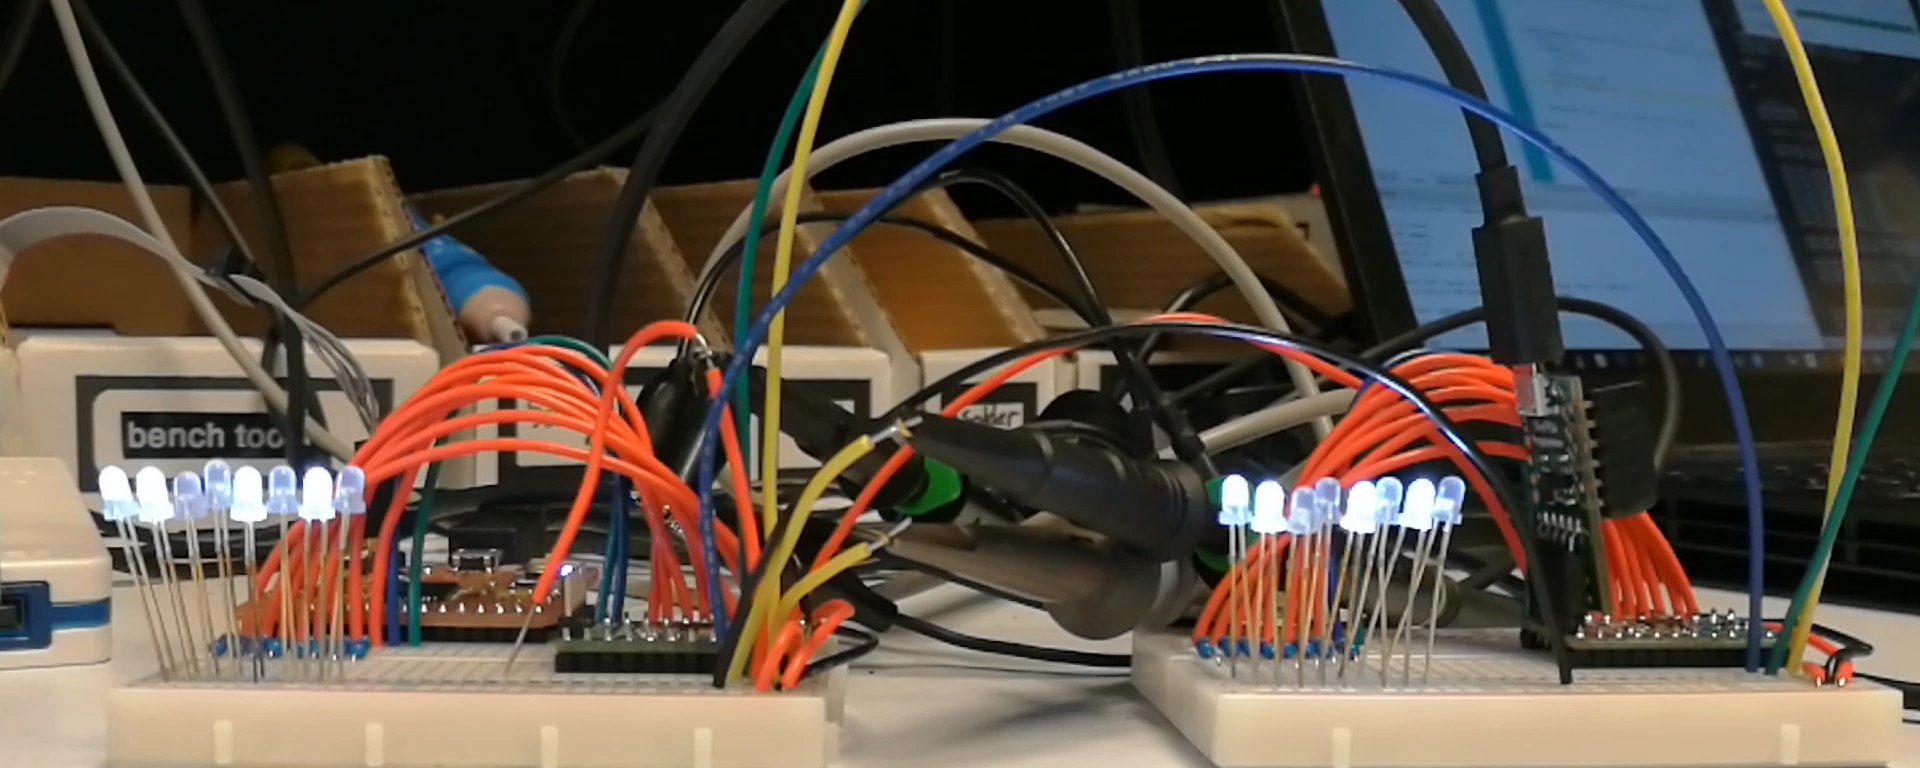 A physical network implemented on breadboards